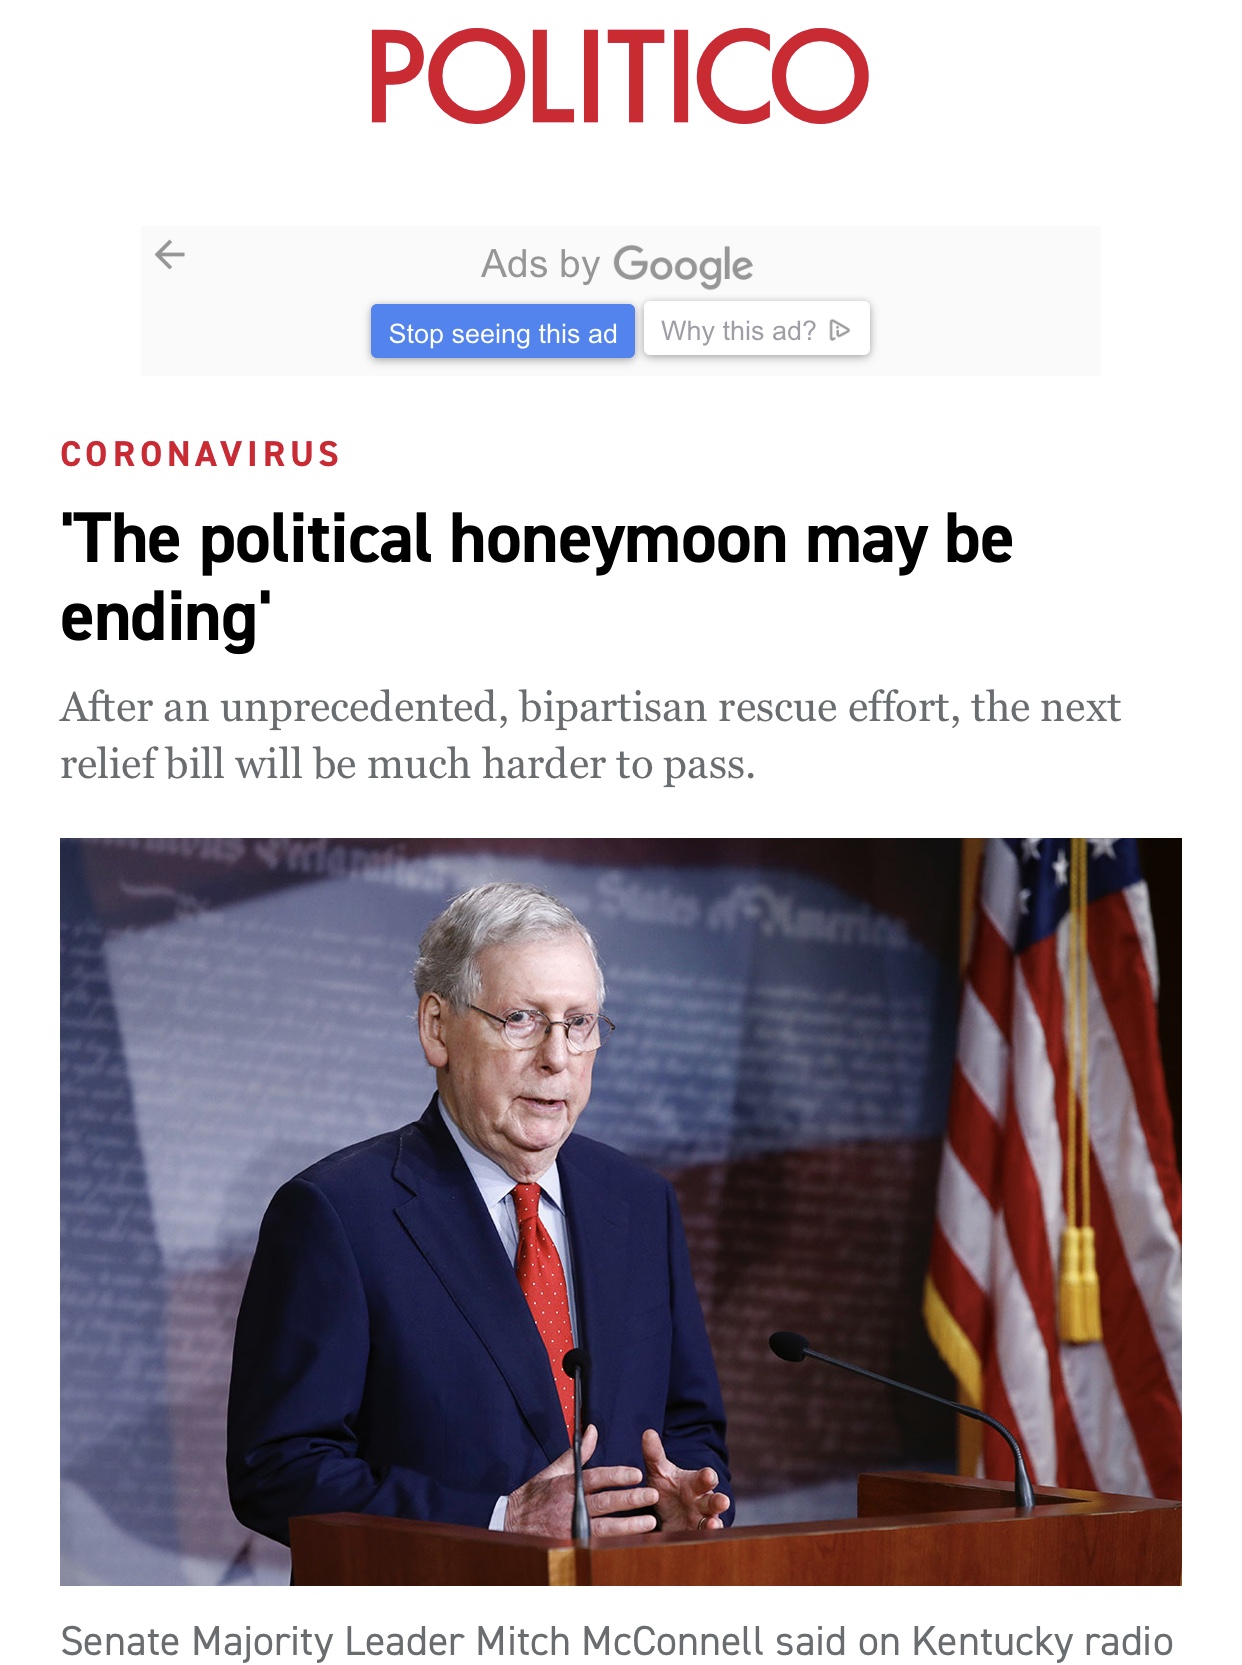 The Political Honeymoon May Be Ending